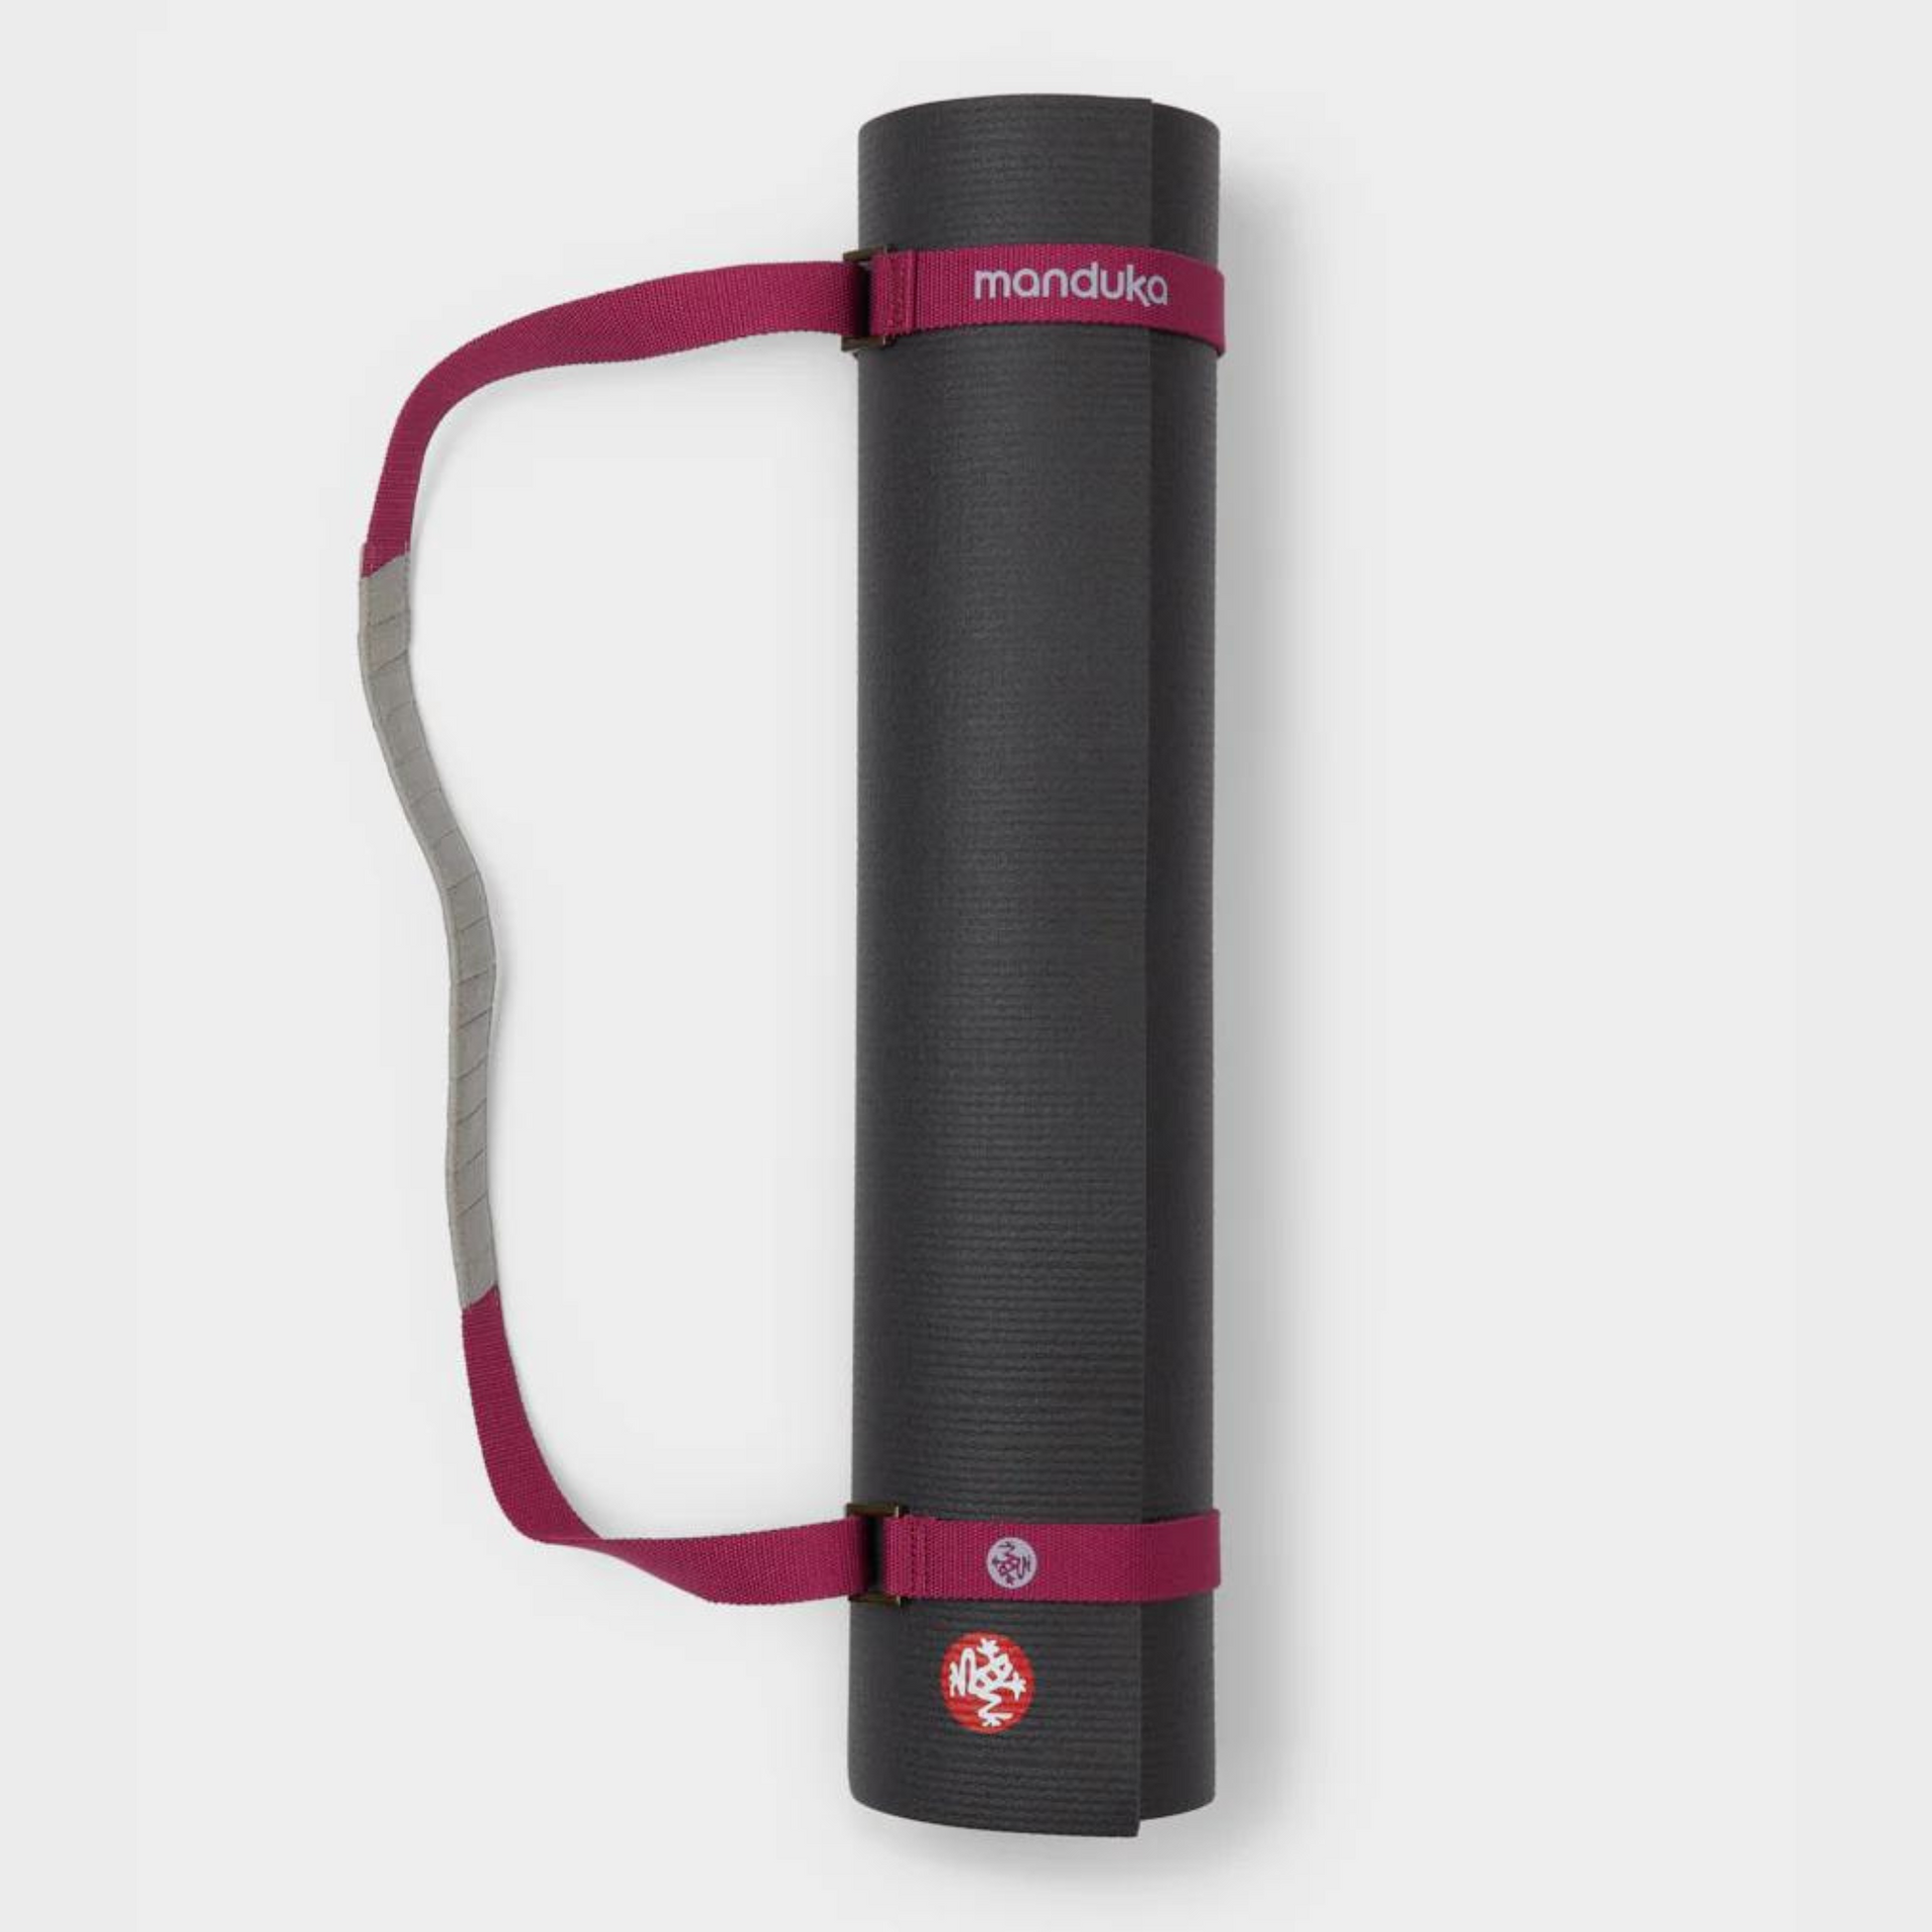 manduka mat rolled up being held by rose color mat carrier strap